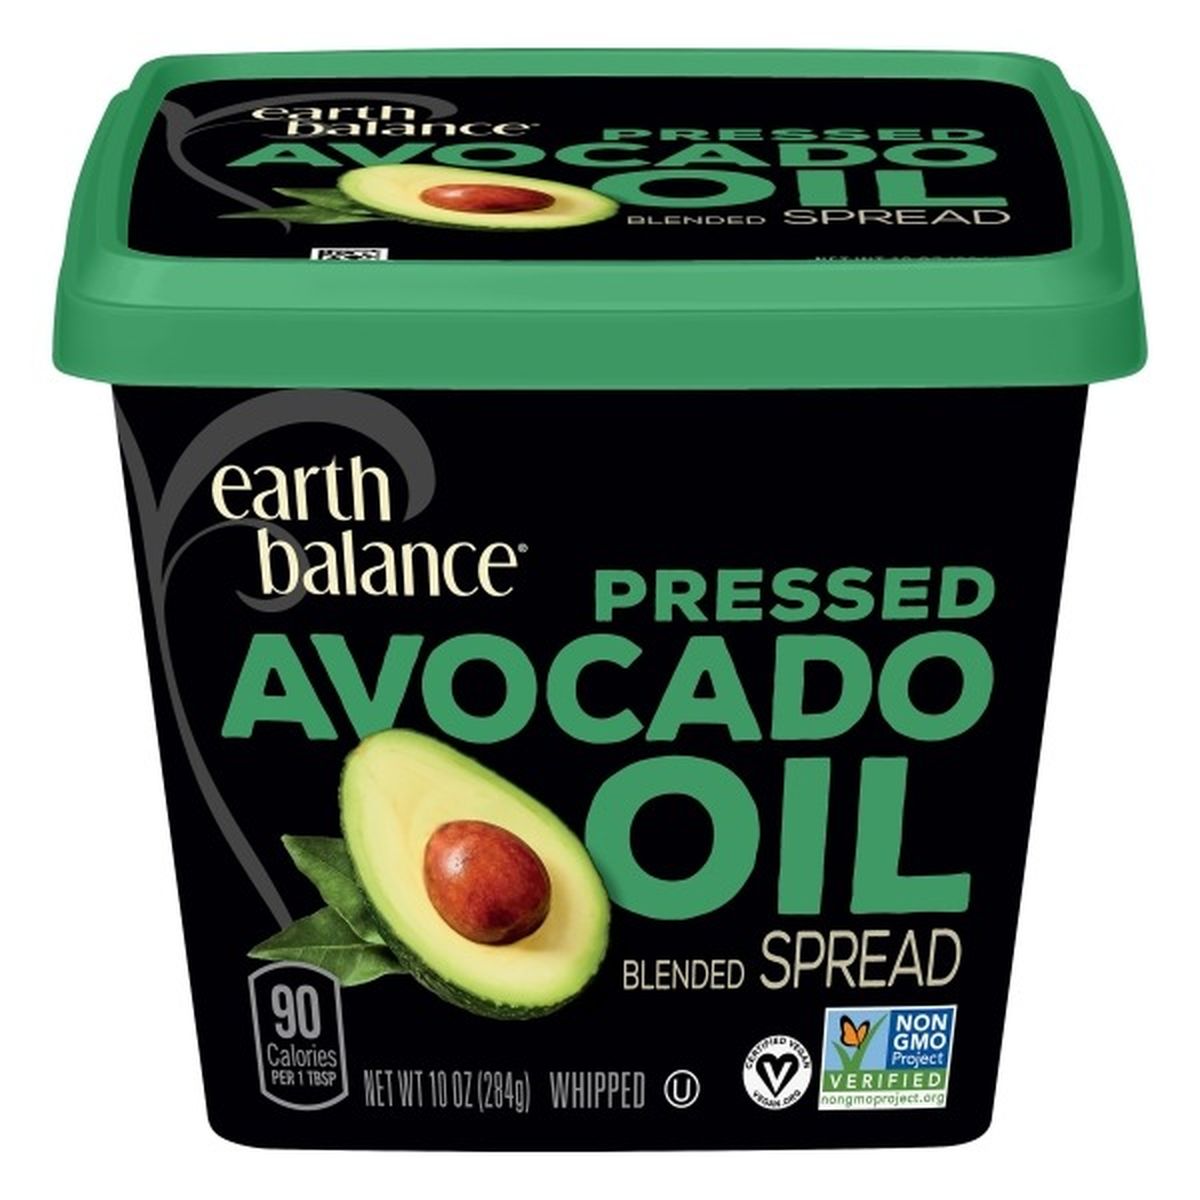 Calories in Earth Balance Spread, Pressed Avocado Oil, Blended